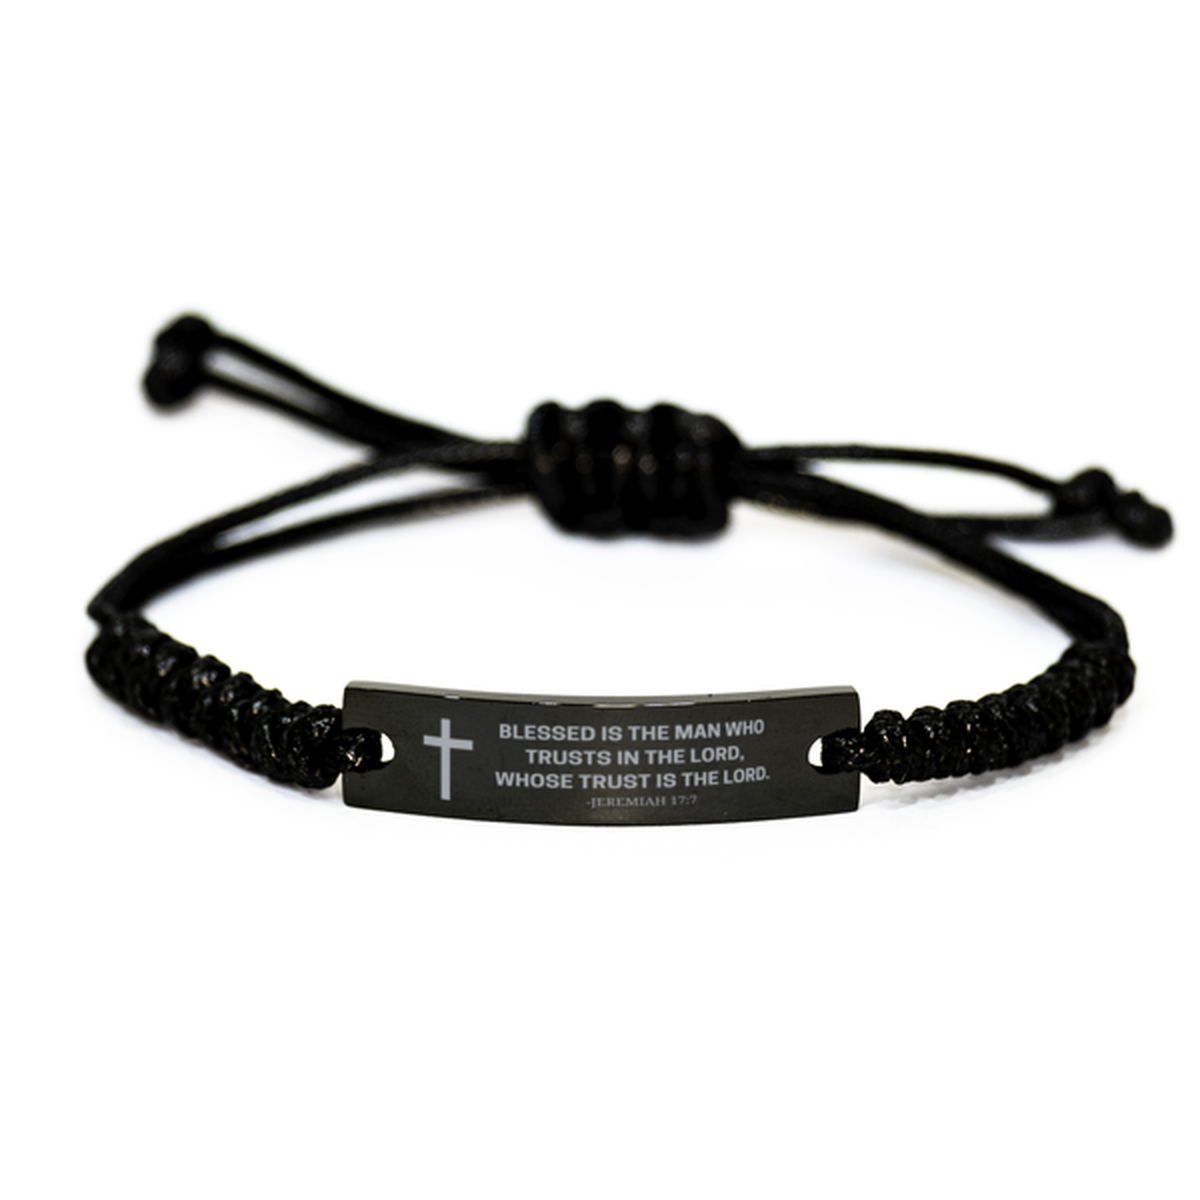 Baptism Gifts For Teenage Boys Girls, Christian Bible Verse Black Rope Bracelet, Blessed is the man who trusts, Catholic Confirmation Gifts for Son, Godson, Grandson, Nephew